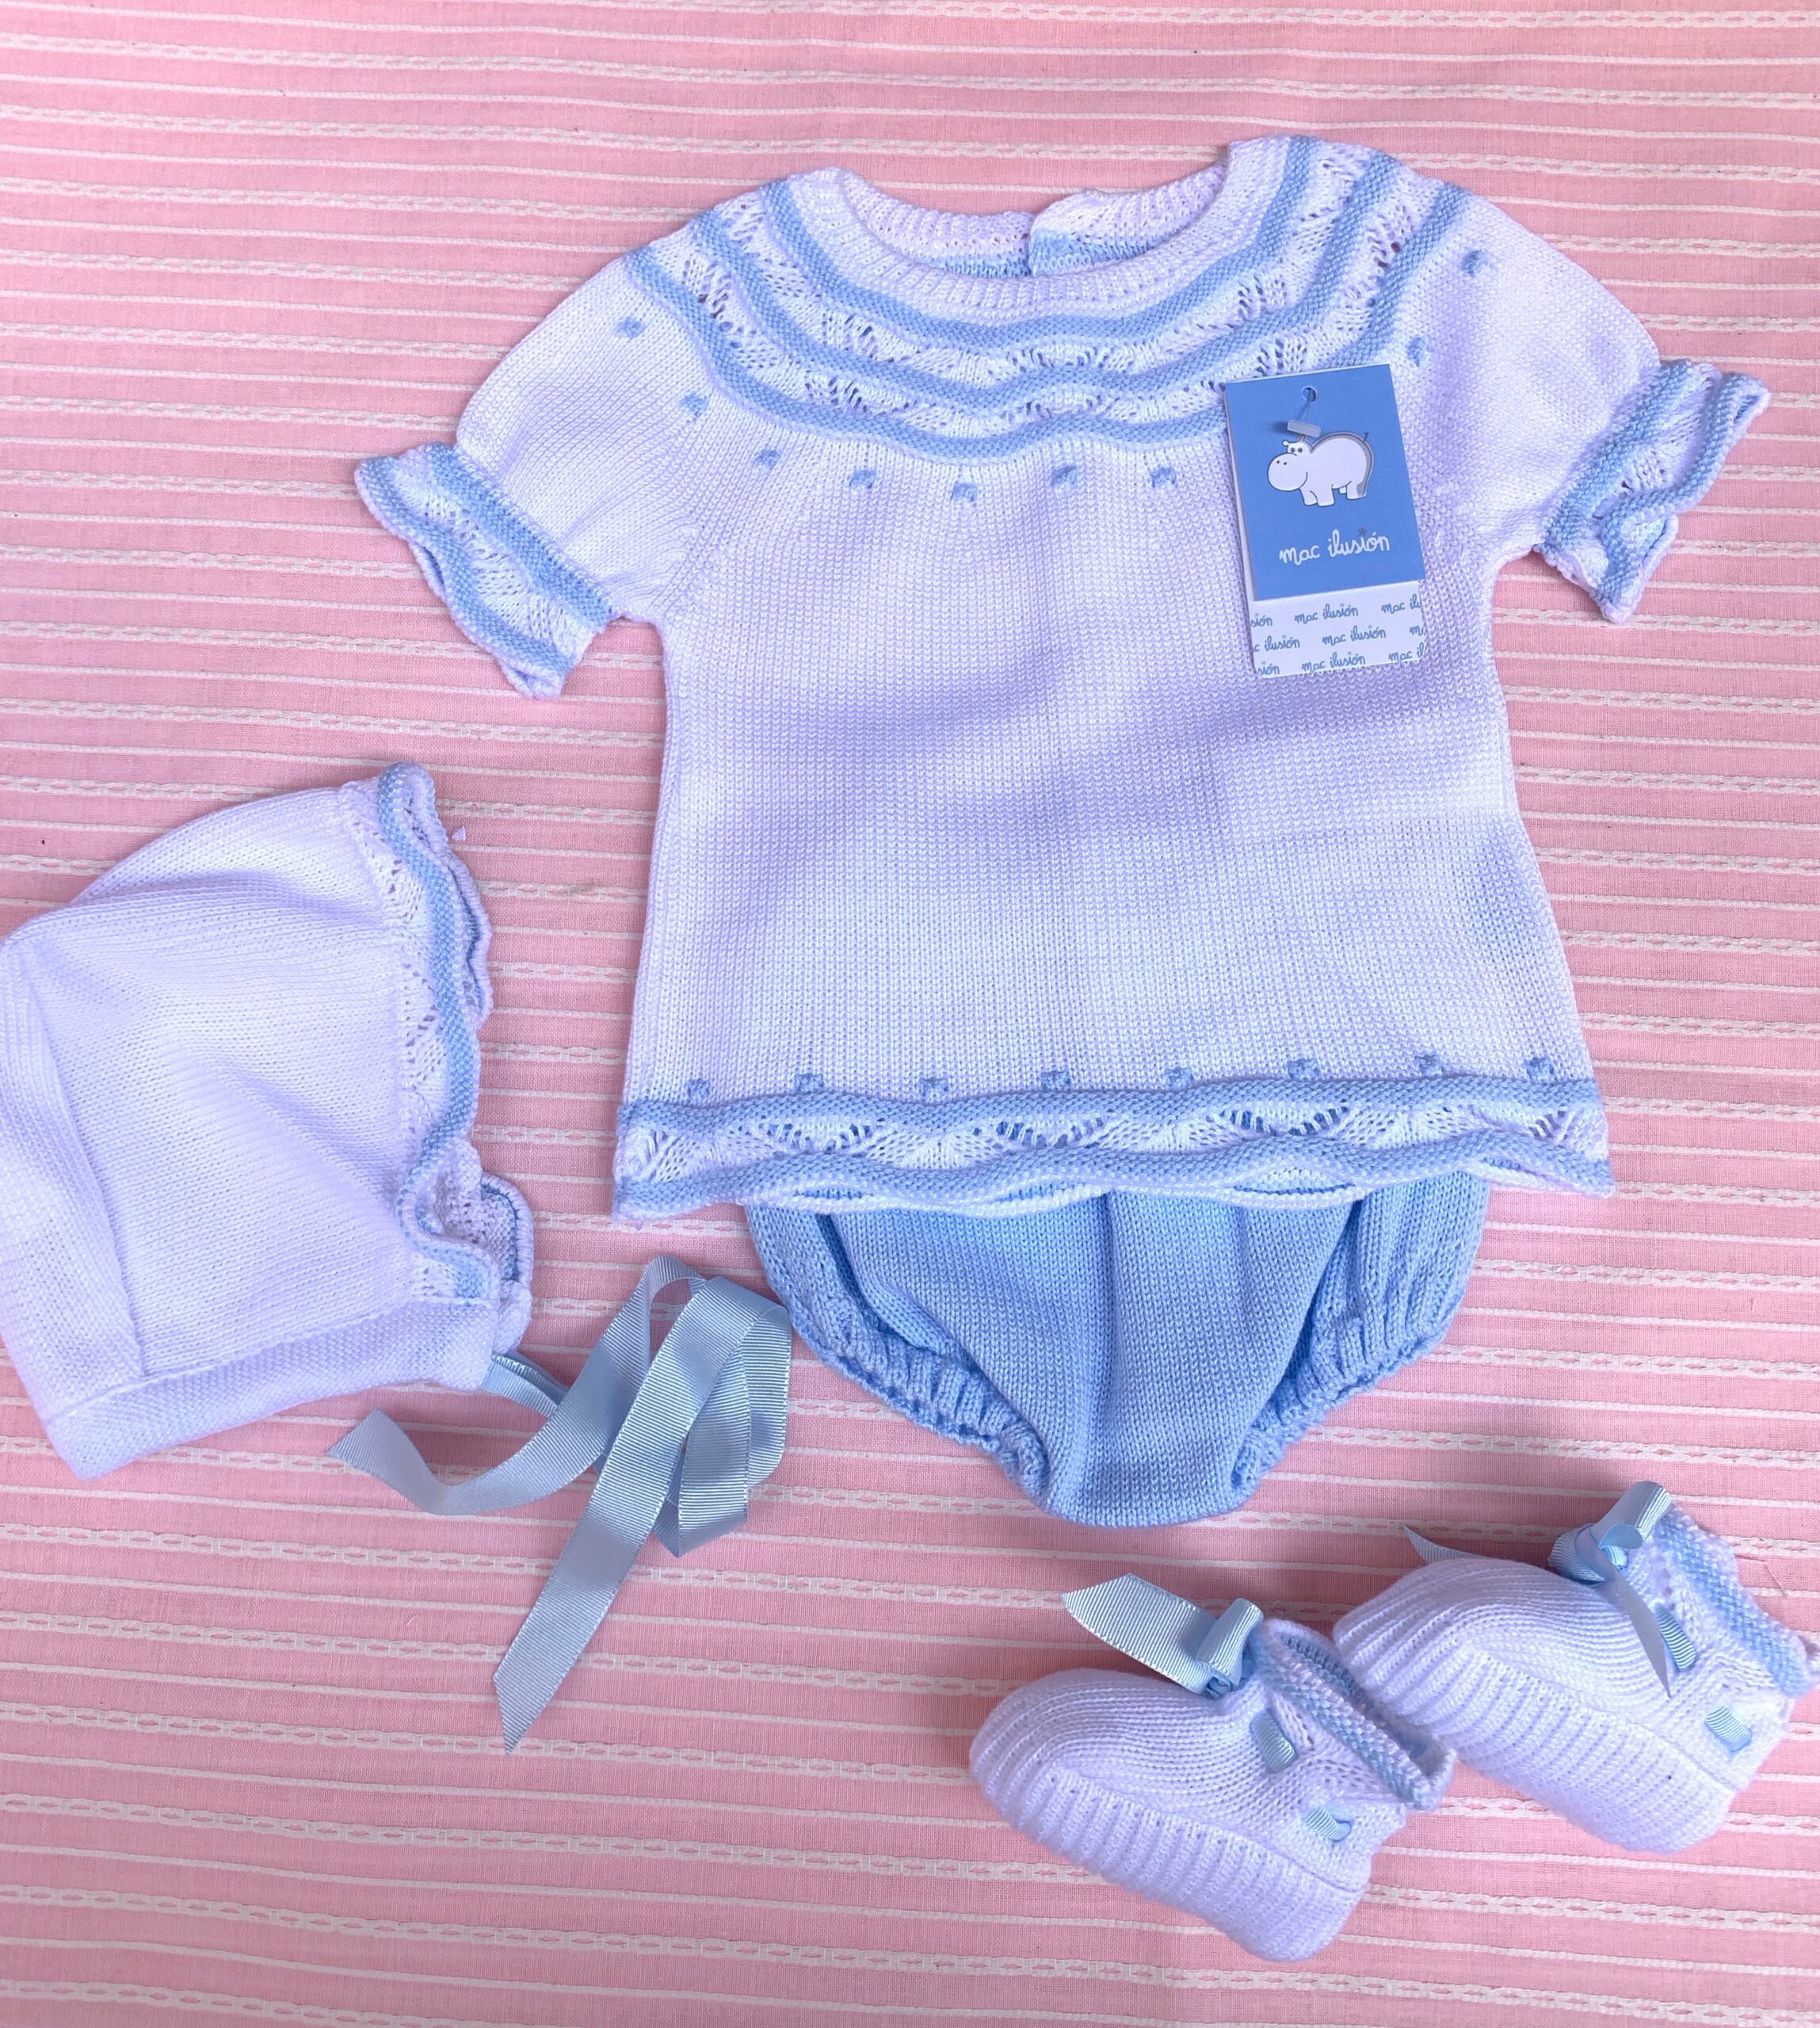 4 pieces white/baby blue baby set